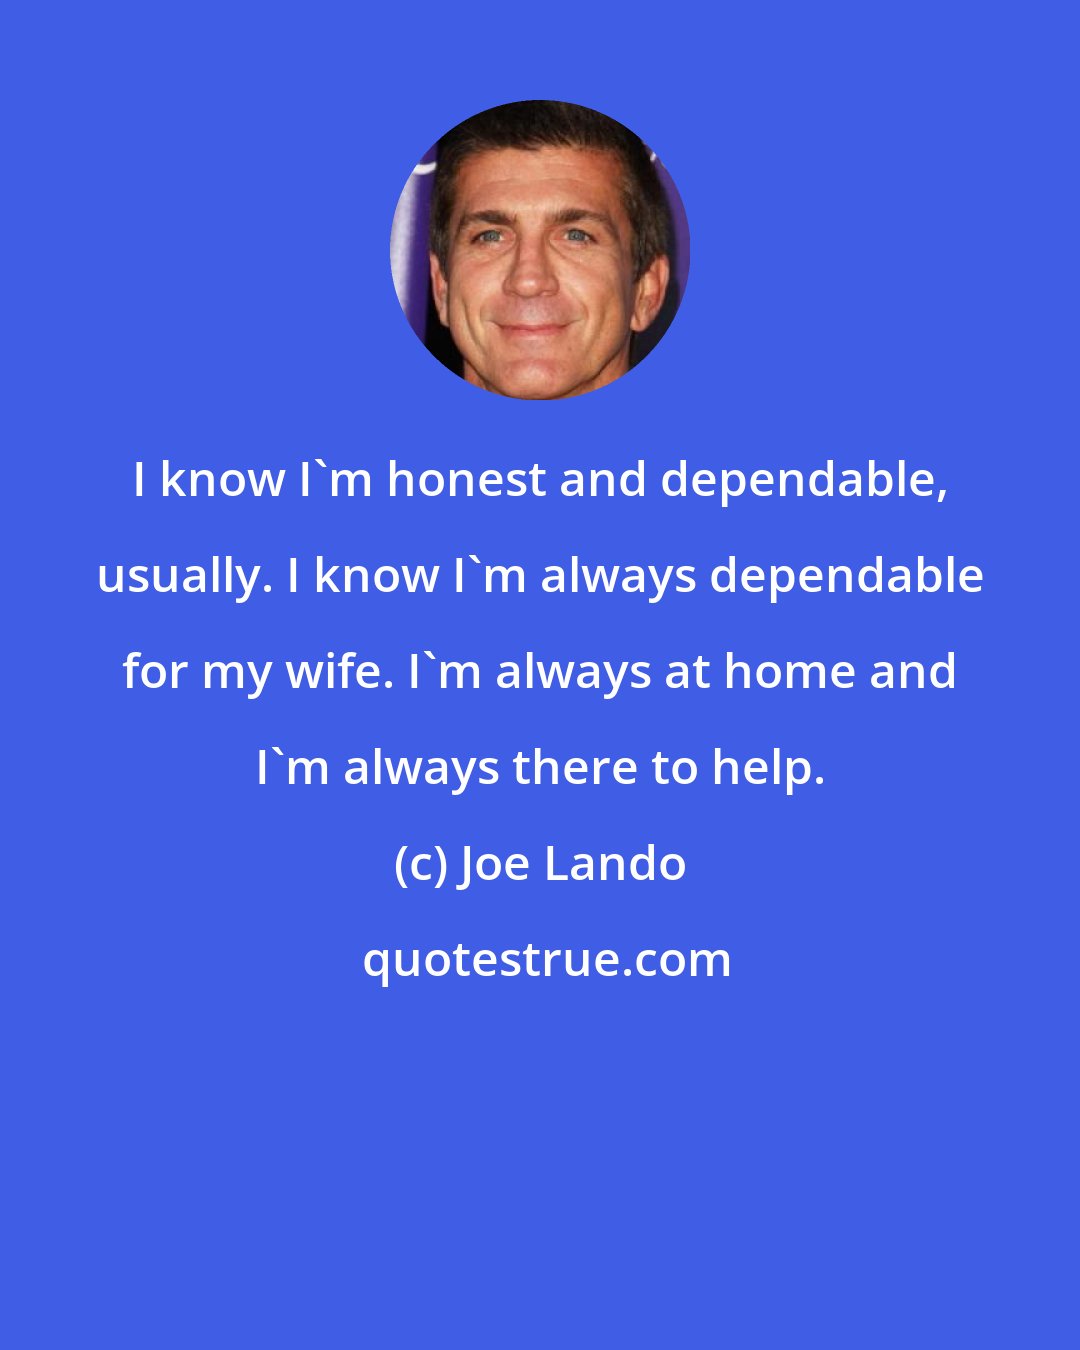 Joe Lando: I know I'm honest and dependable, usually. I know I'm always dependable for my wife. I'm always at home and I'm always there to help.